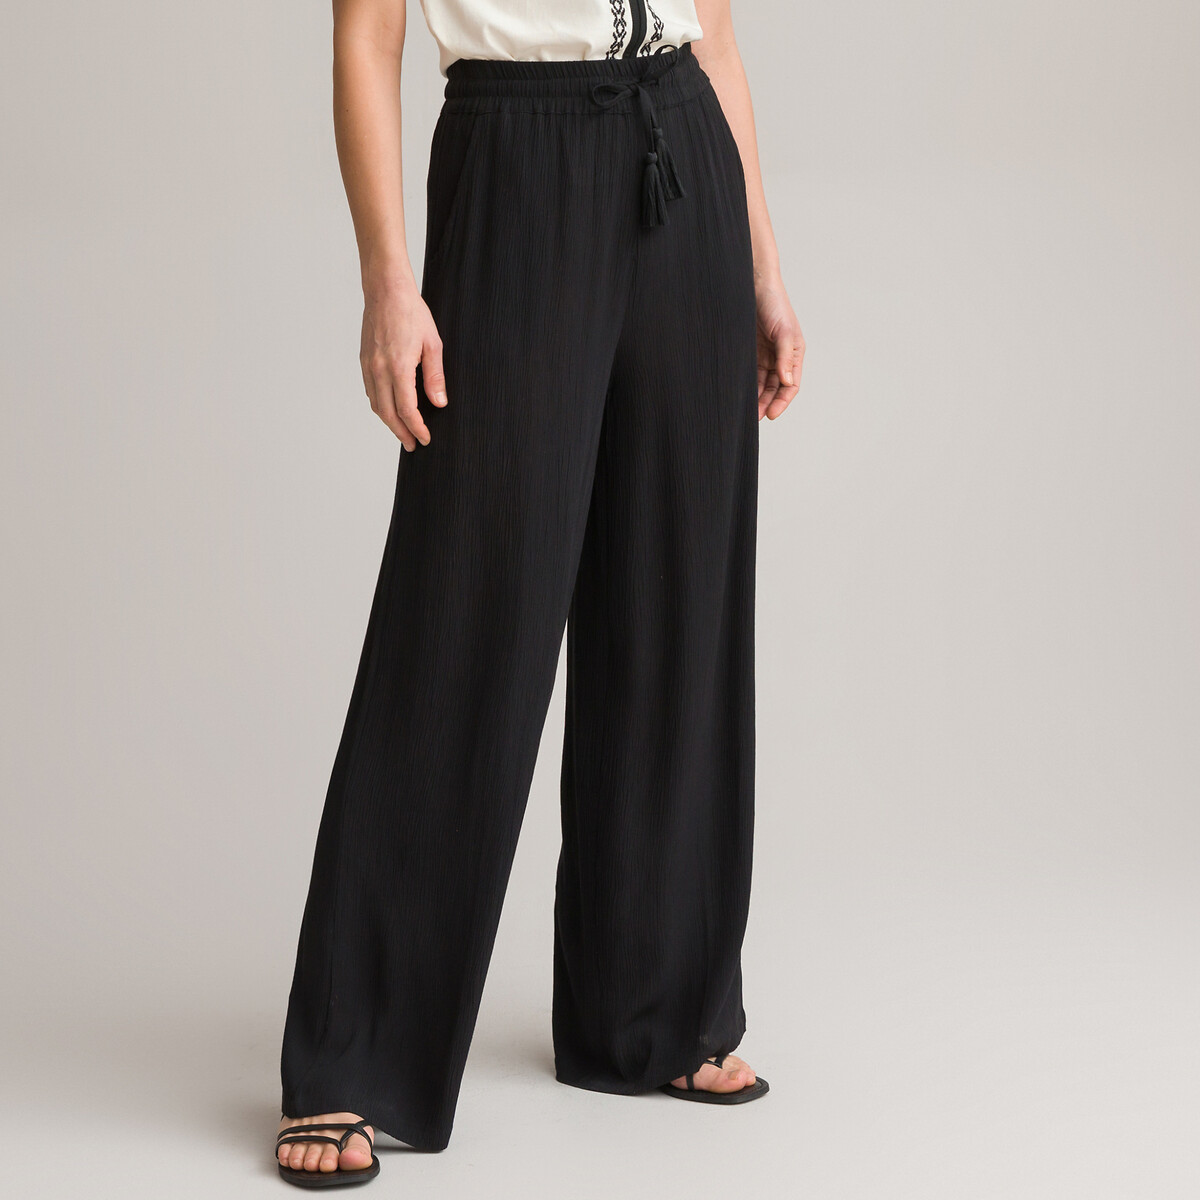 Image of Cr?pon Wide Leg Trousers, Length 30.5"